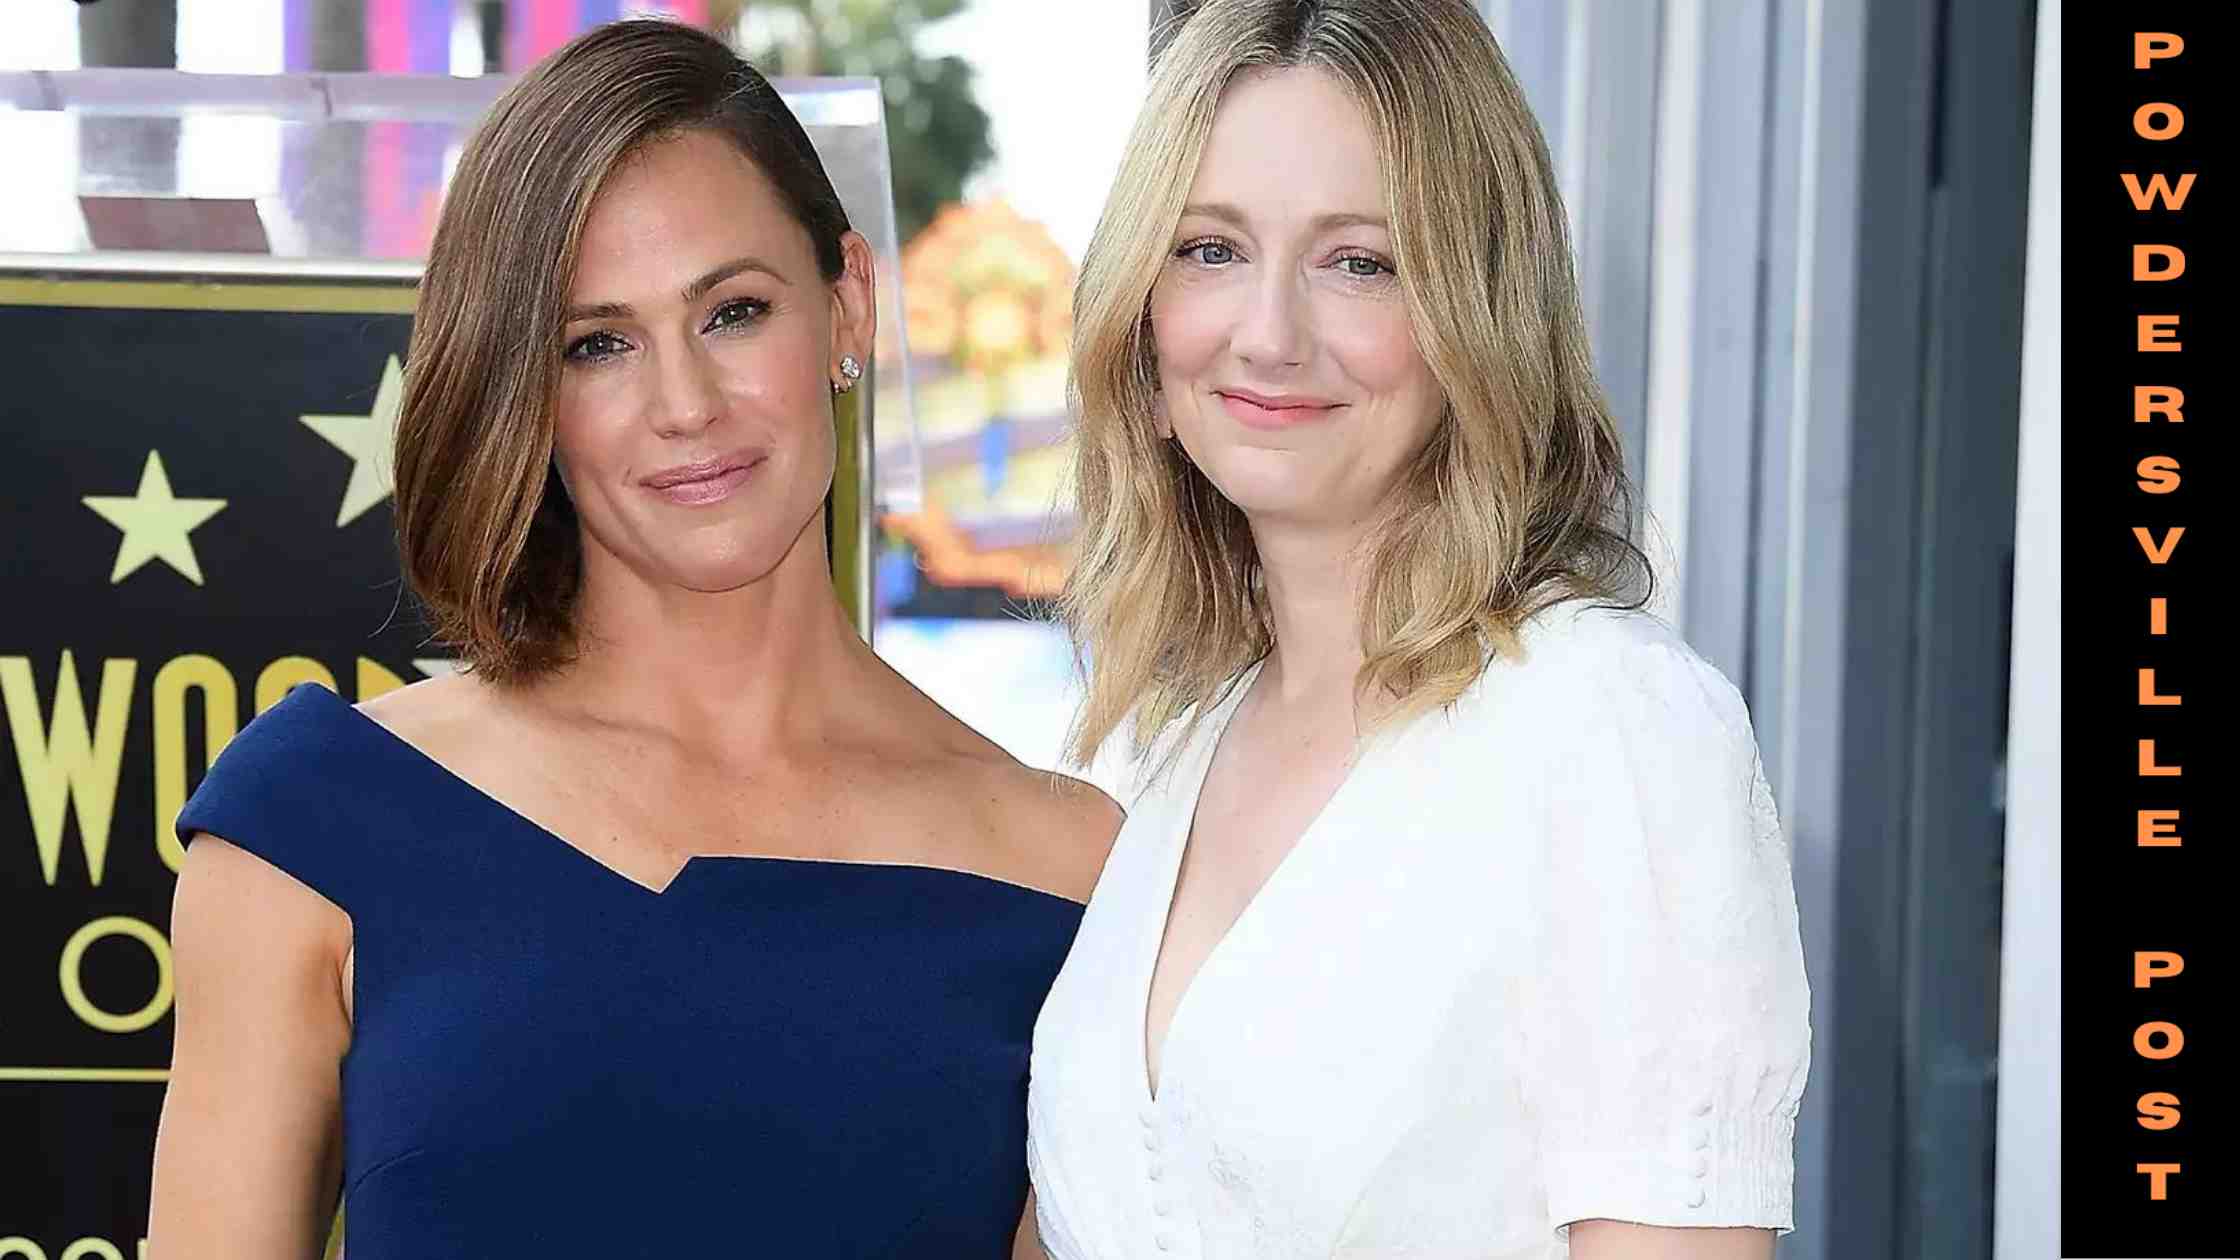 The famous movie stars Jennifer Garner and Judy Greer recently reconnected after 17 years since the release of “13 Going on 30.”